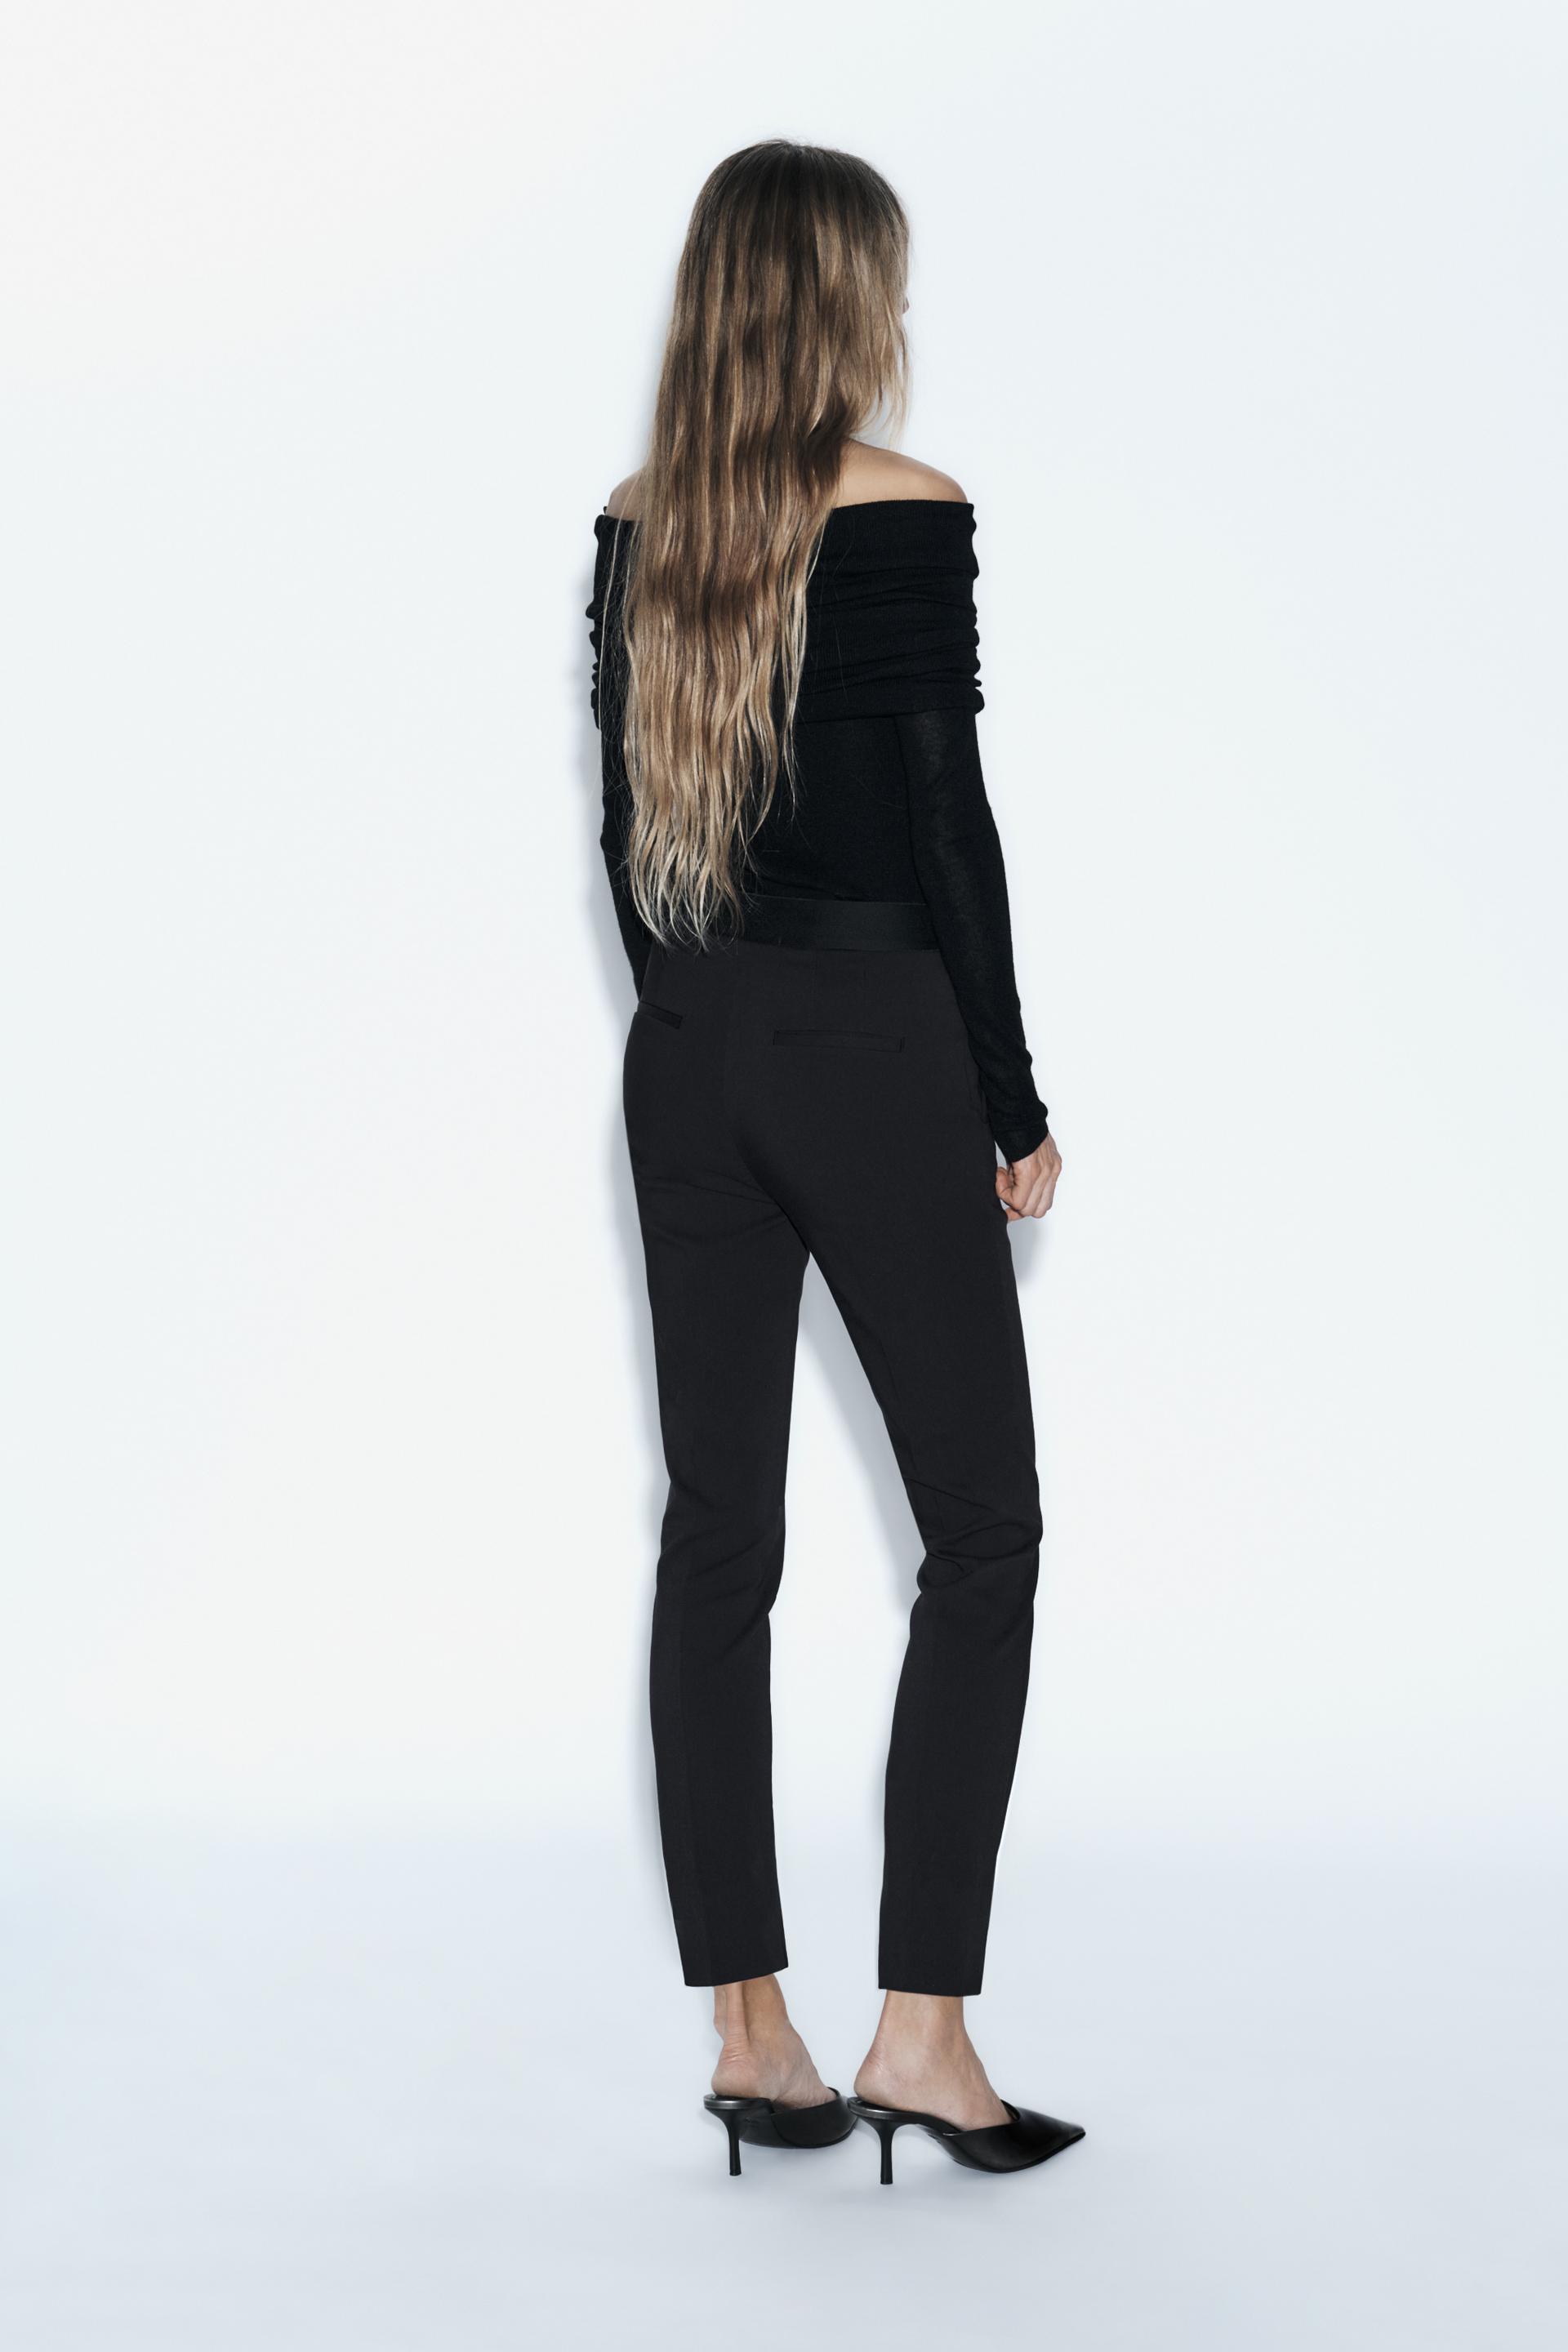 LEGGINGS WITH A WIDE ELASTIC WAISTBAND - Black